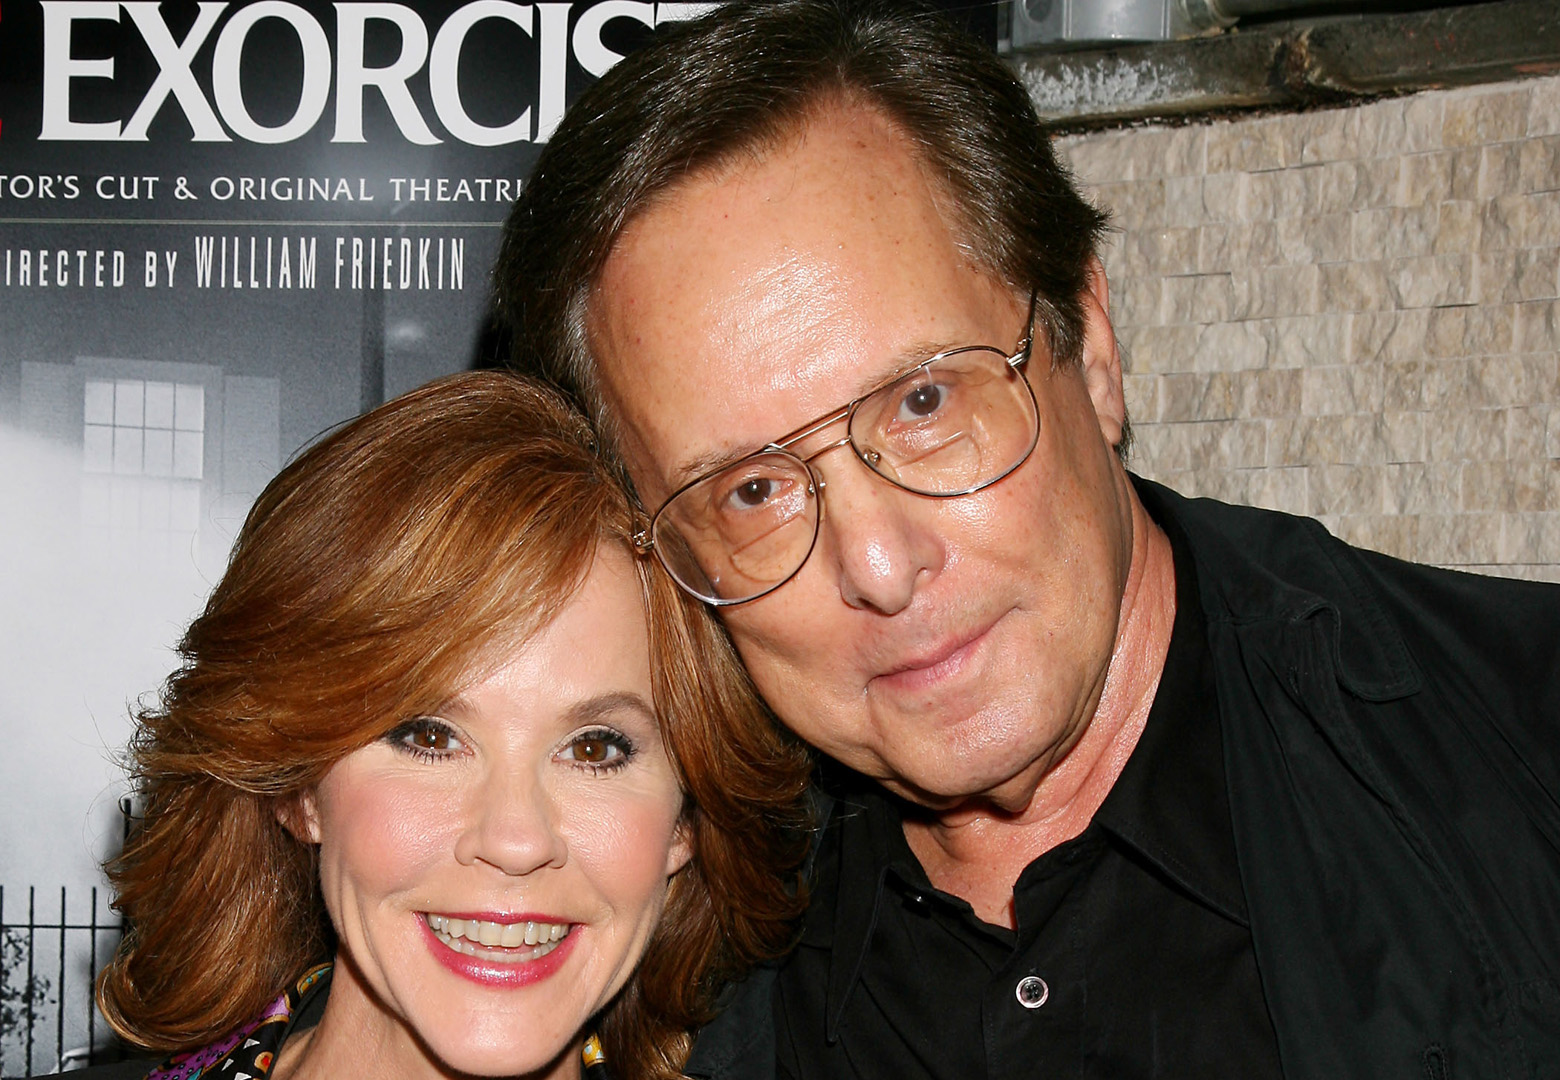 In this photo released by Starpix, Linda Blair, who in 1973 starred in the original version of  "The Exorcist," joins the film's director, William Friedkin, for a photo at a screening of the remastered film, Wednesday, Sept. 29, 2010, at the Museum of Modern Art in New York. (AP Photo/Starpix, Dave Allocca)